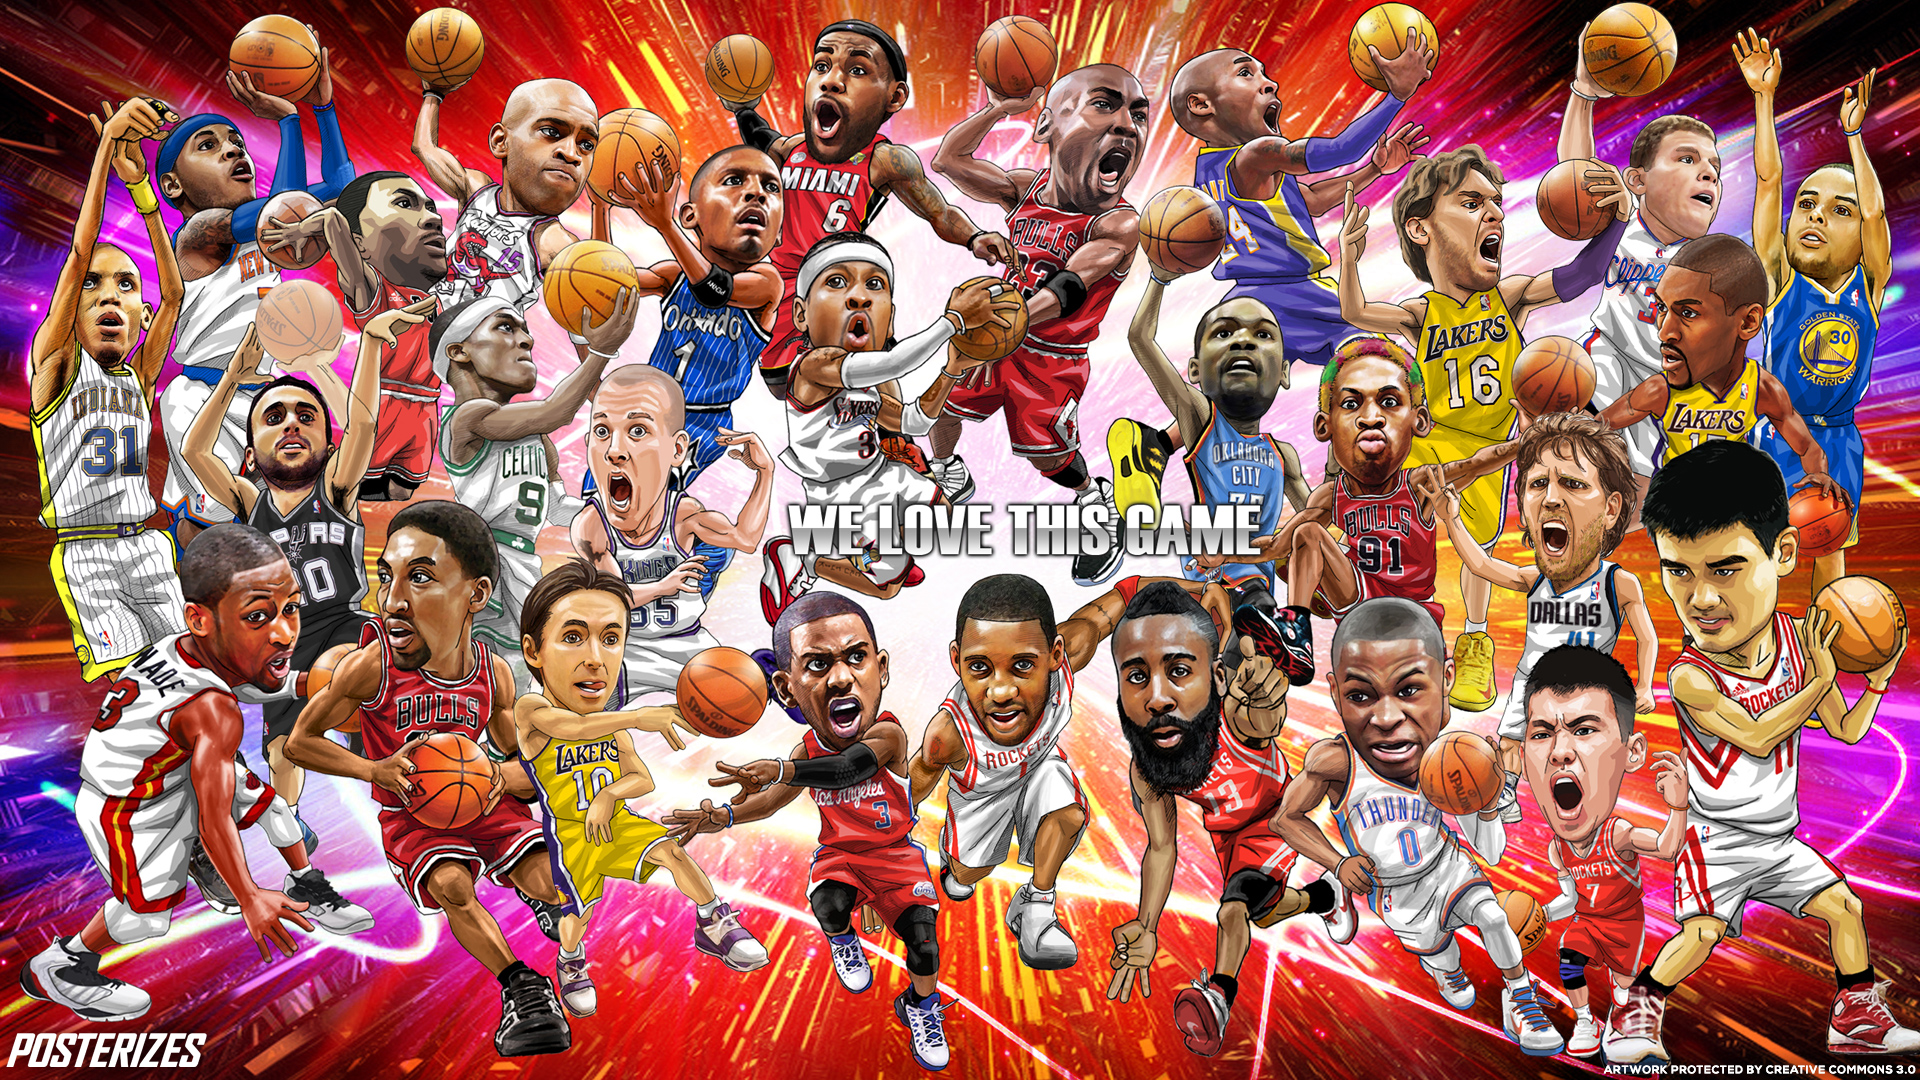 All About Basketball | By: Dylan Szczepanek1920 x 1080